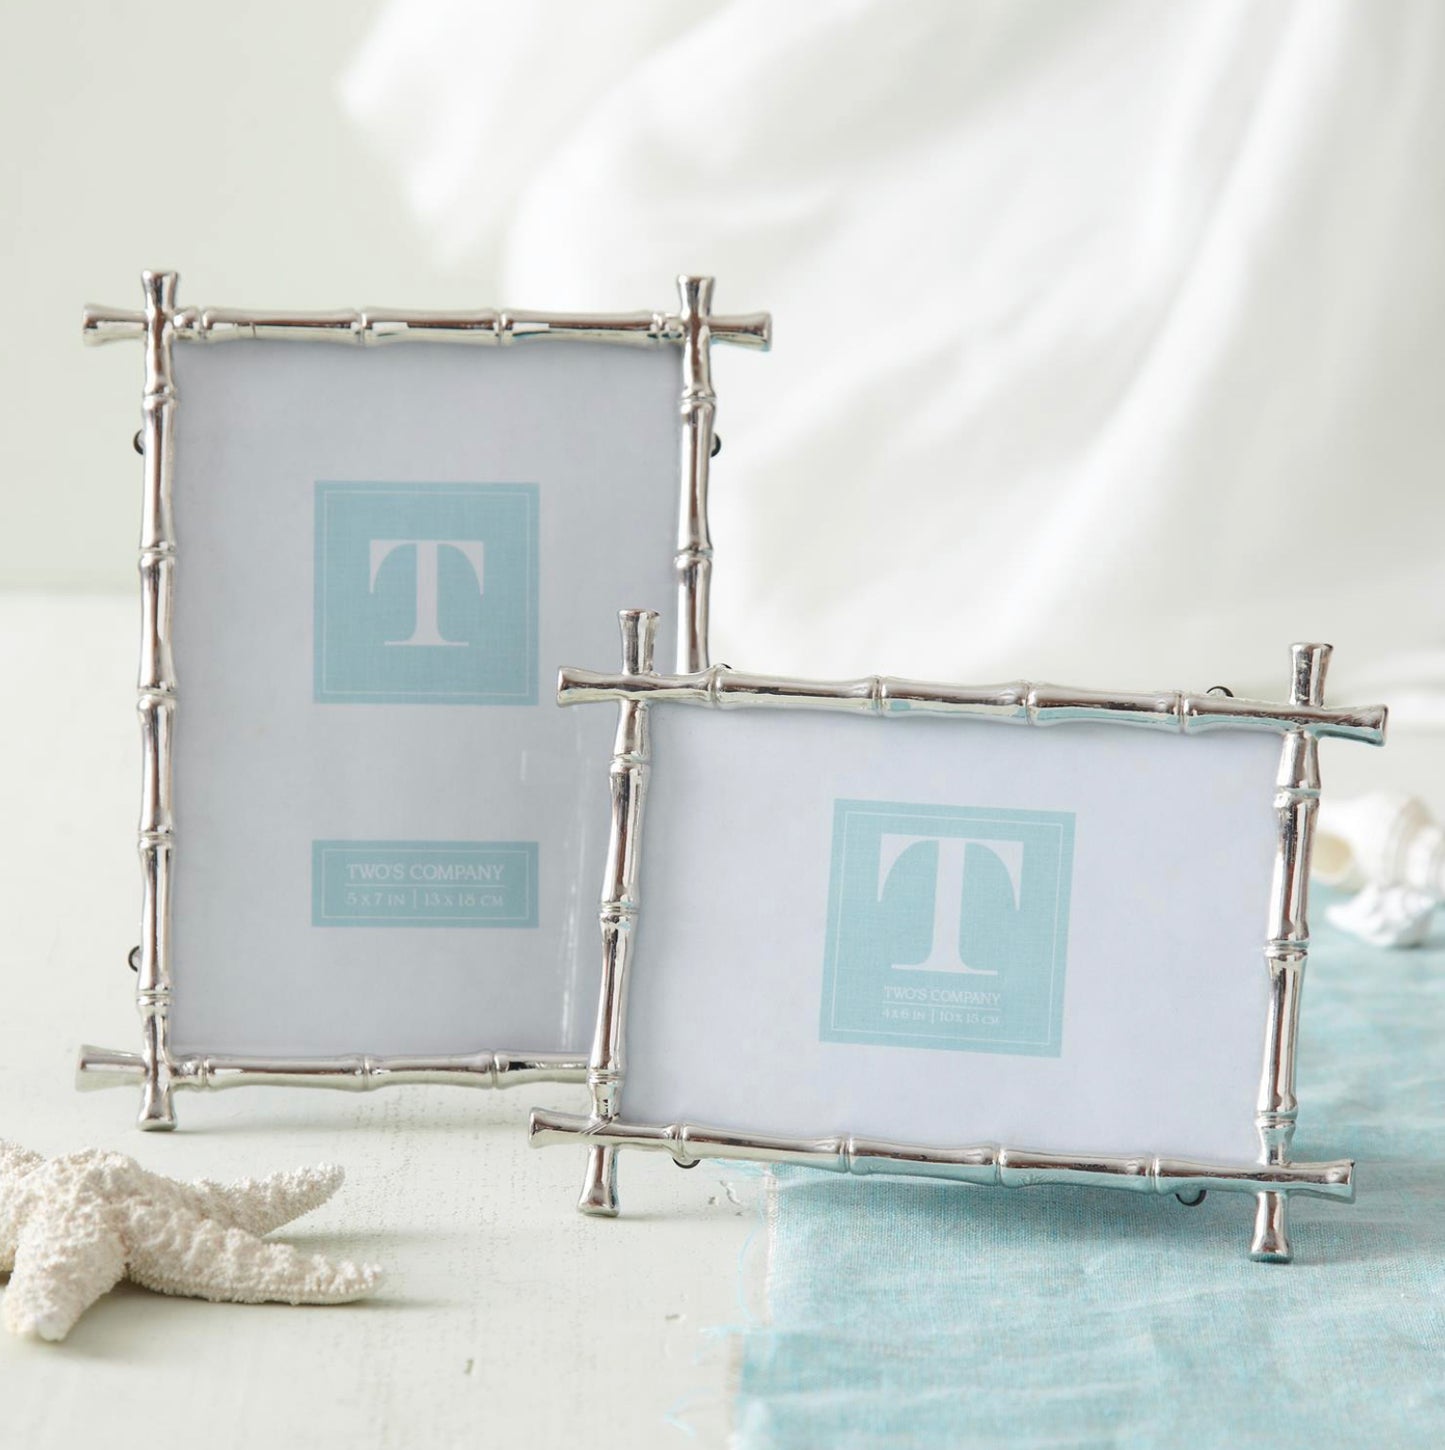 Bamboo Photo Frame Includes 2 Sizes: 4" x 6"